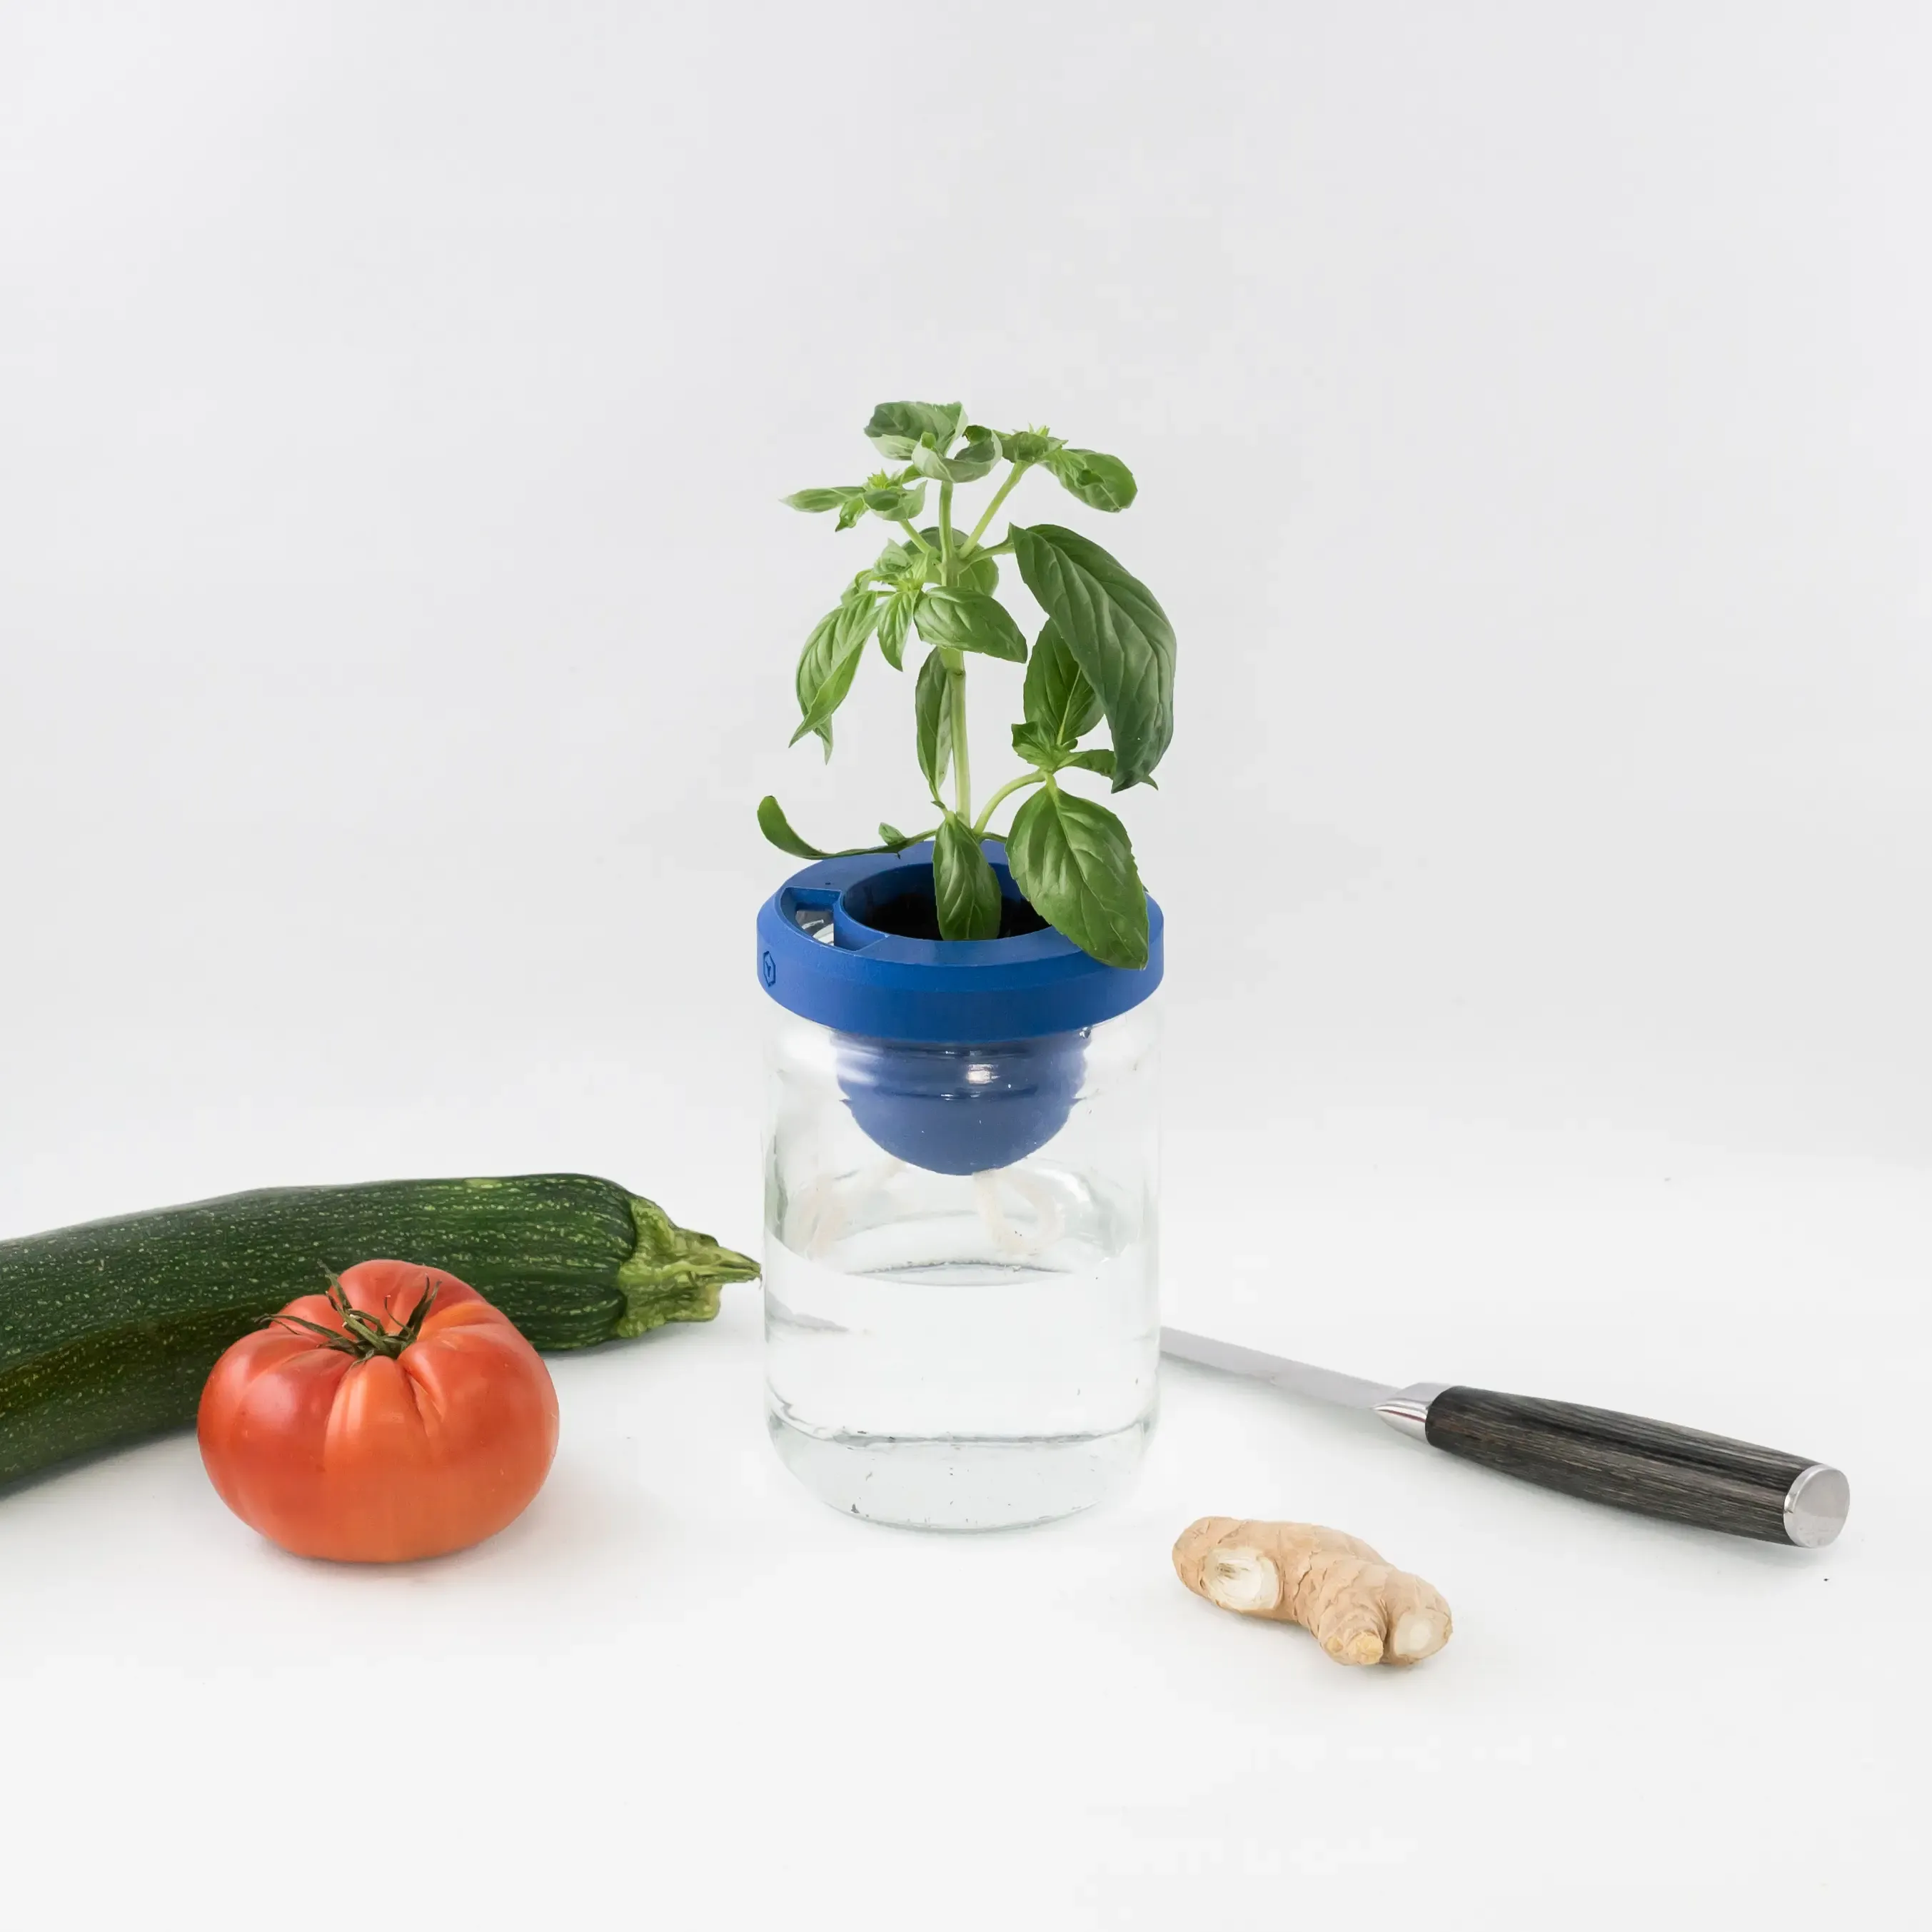 The self-watering upcycled pot